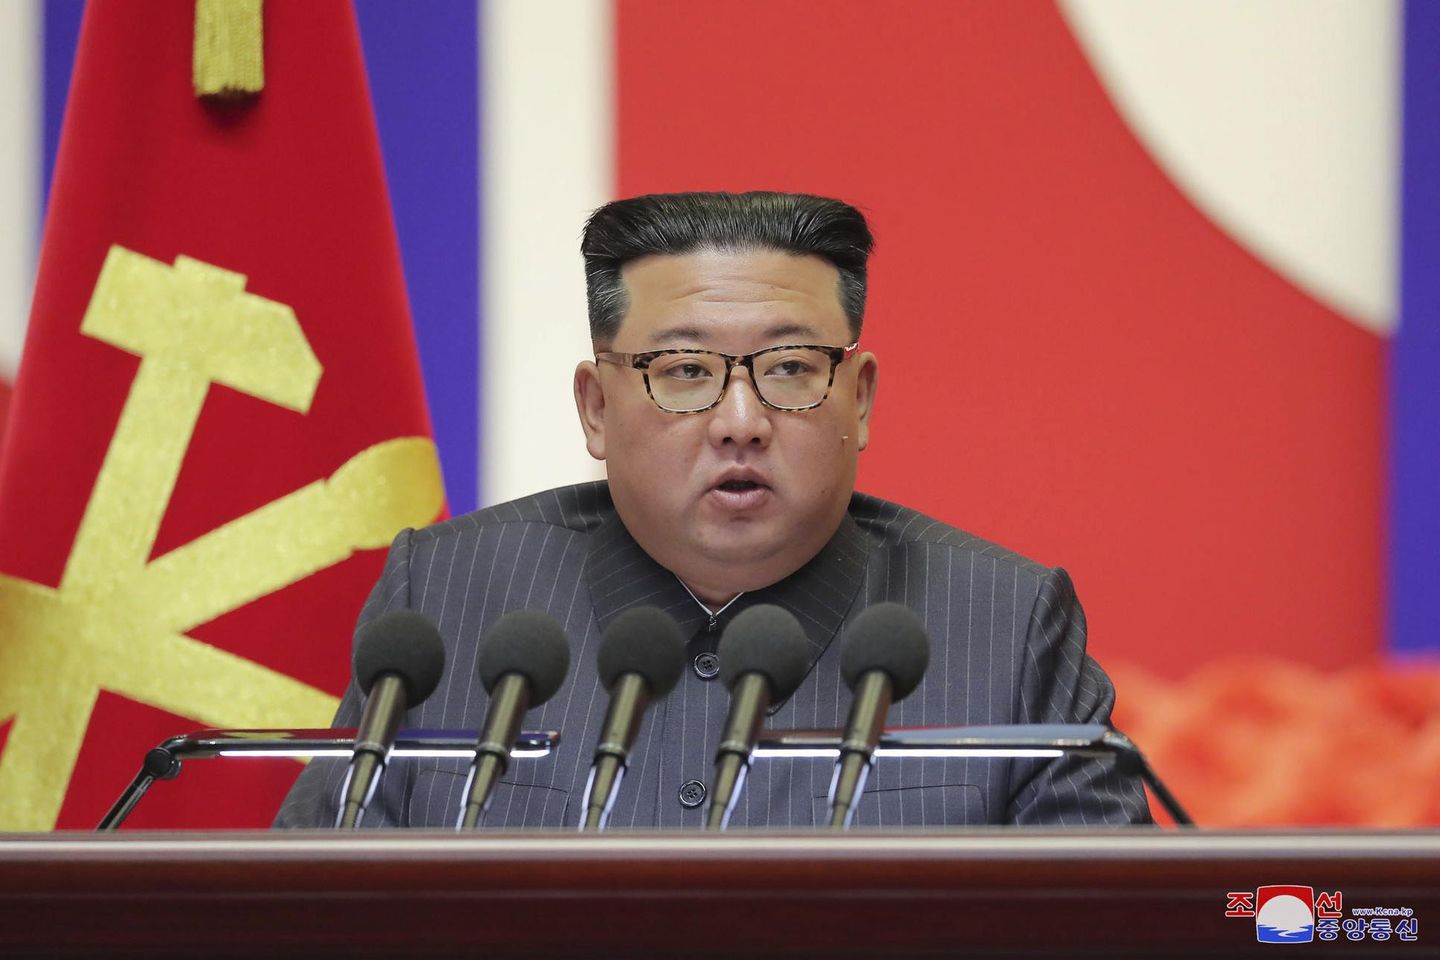 [News] North Korea claims disputed victory over COVID-19, blames Seoul